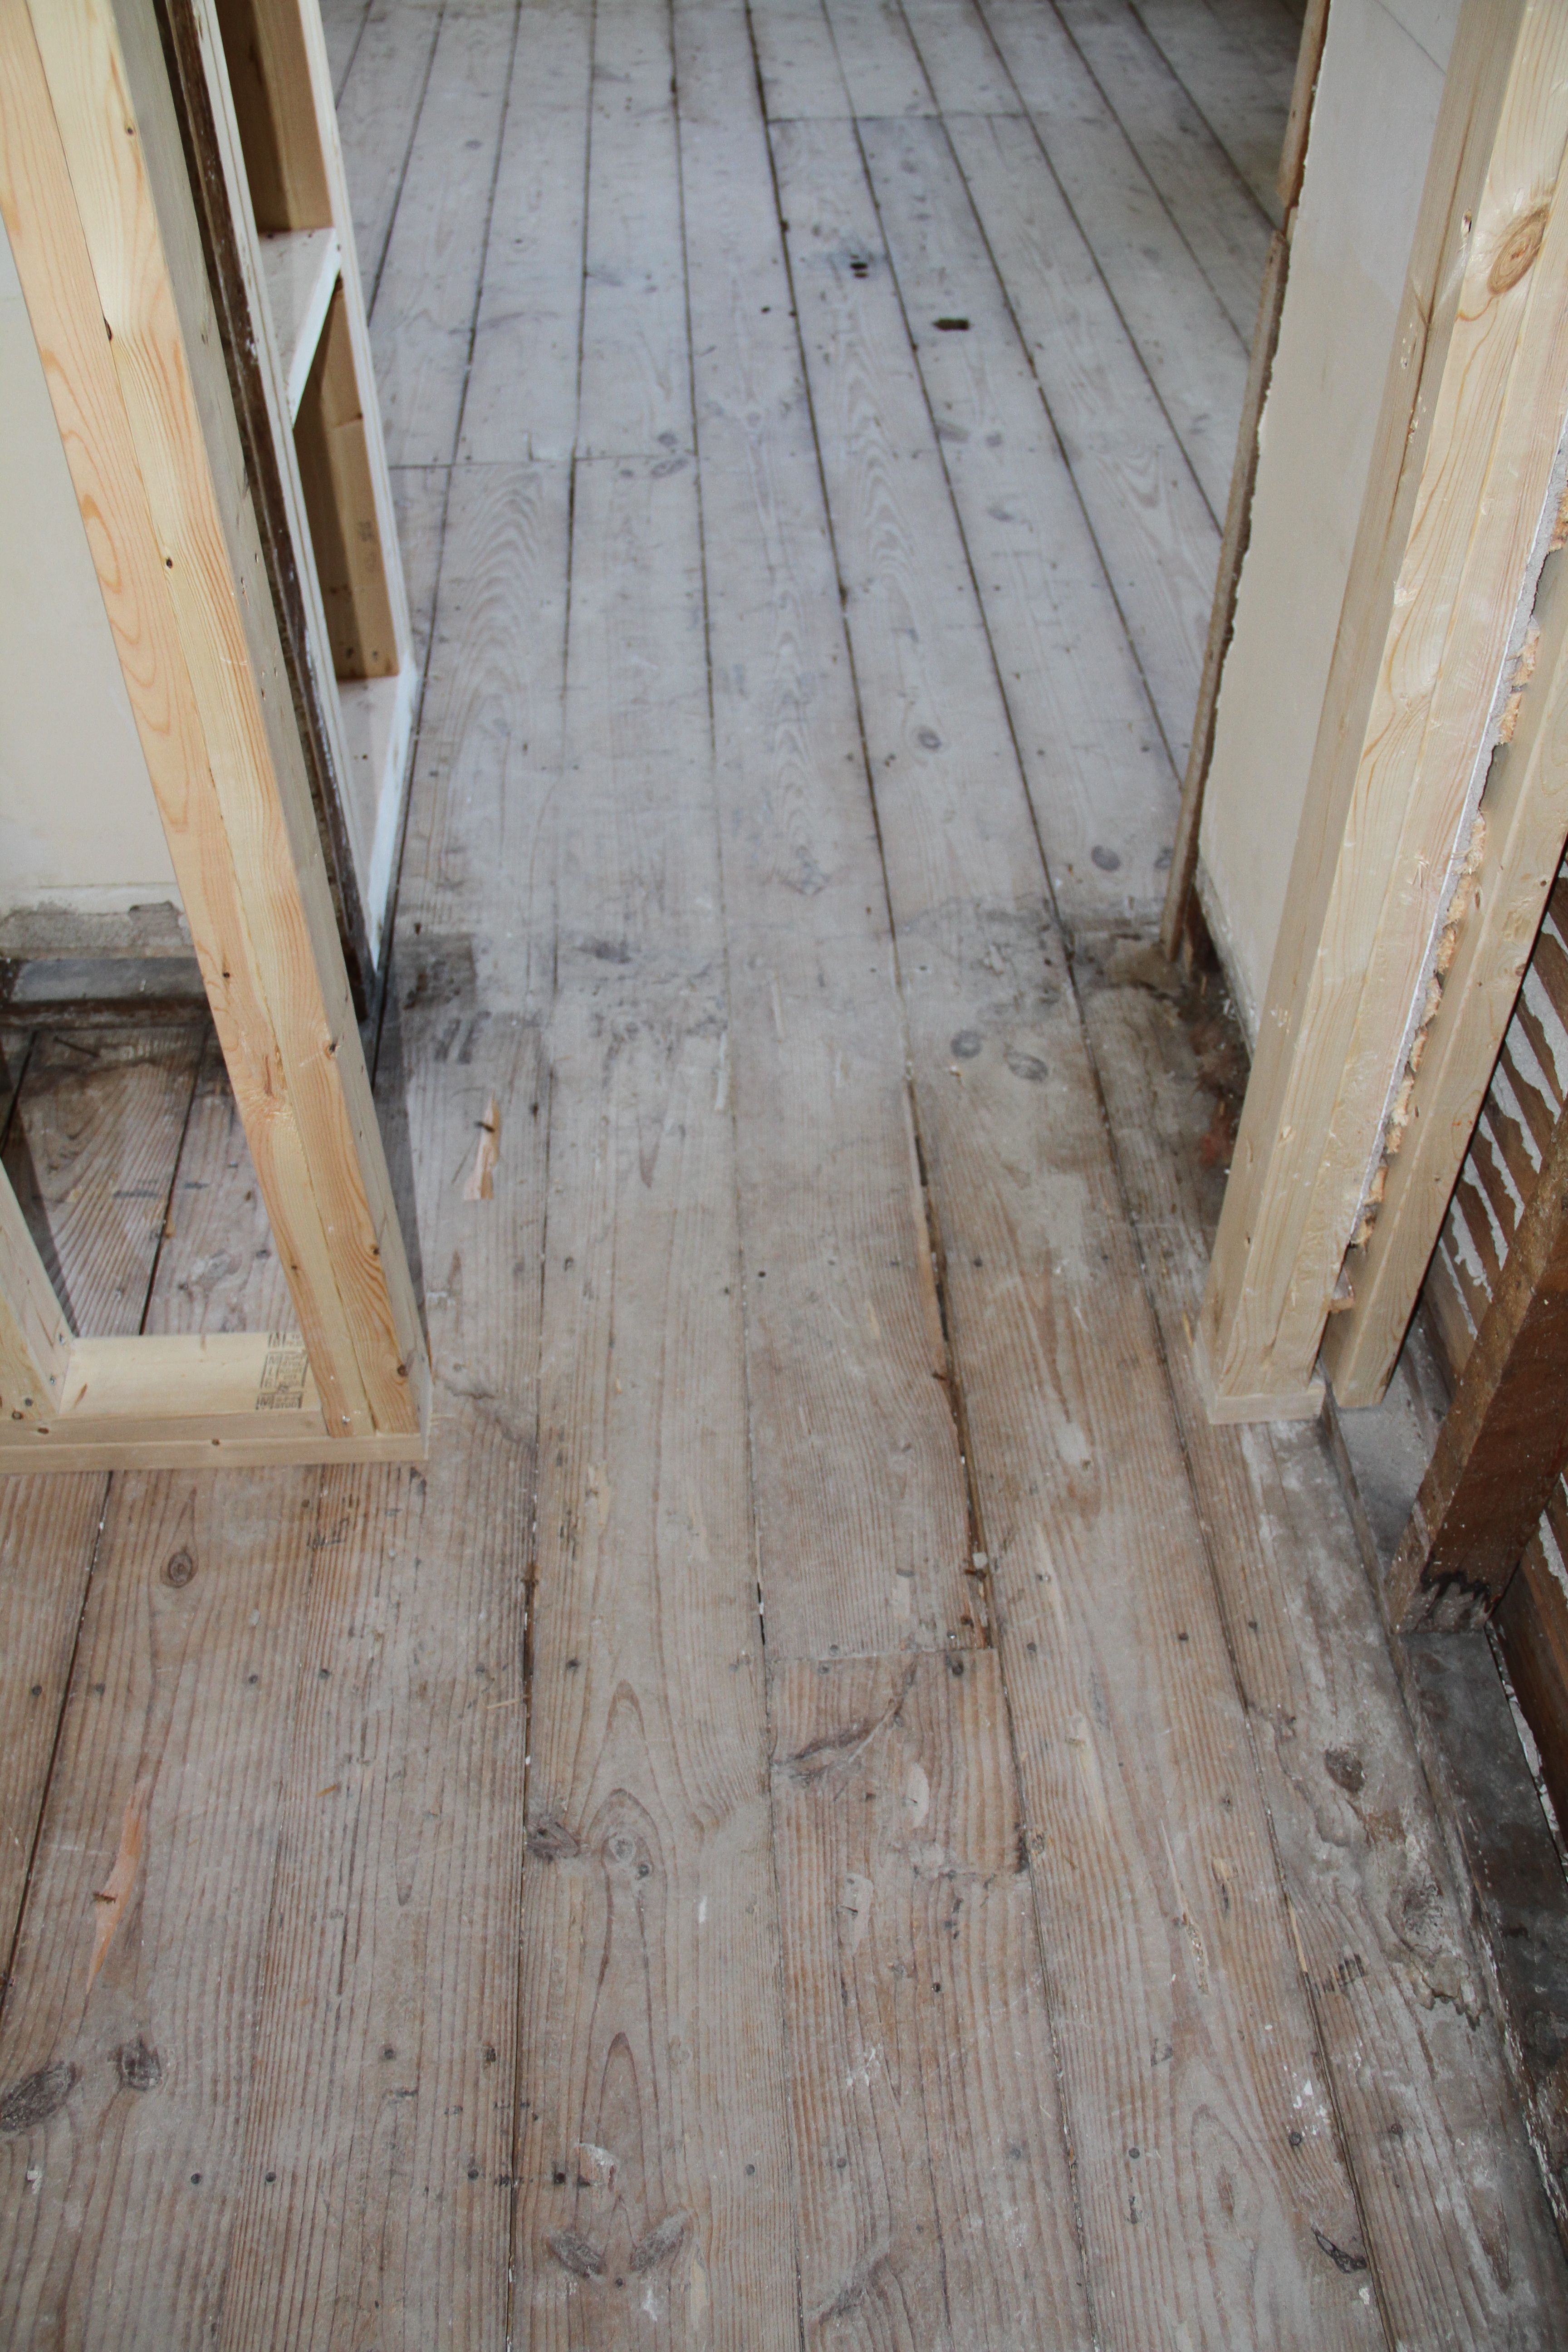 Eventually this will be a shot of beautiful flooring, both tile and new (to match old) oak.